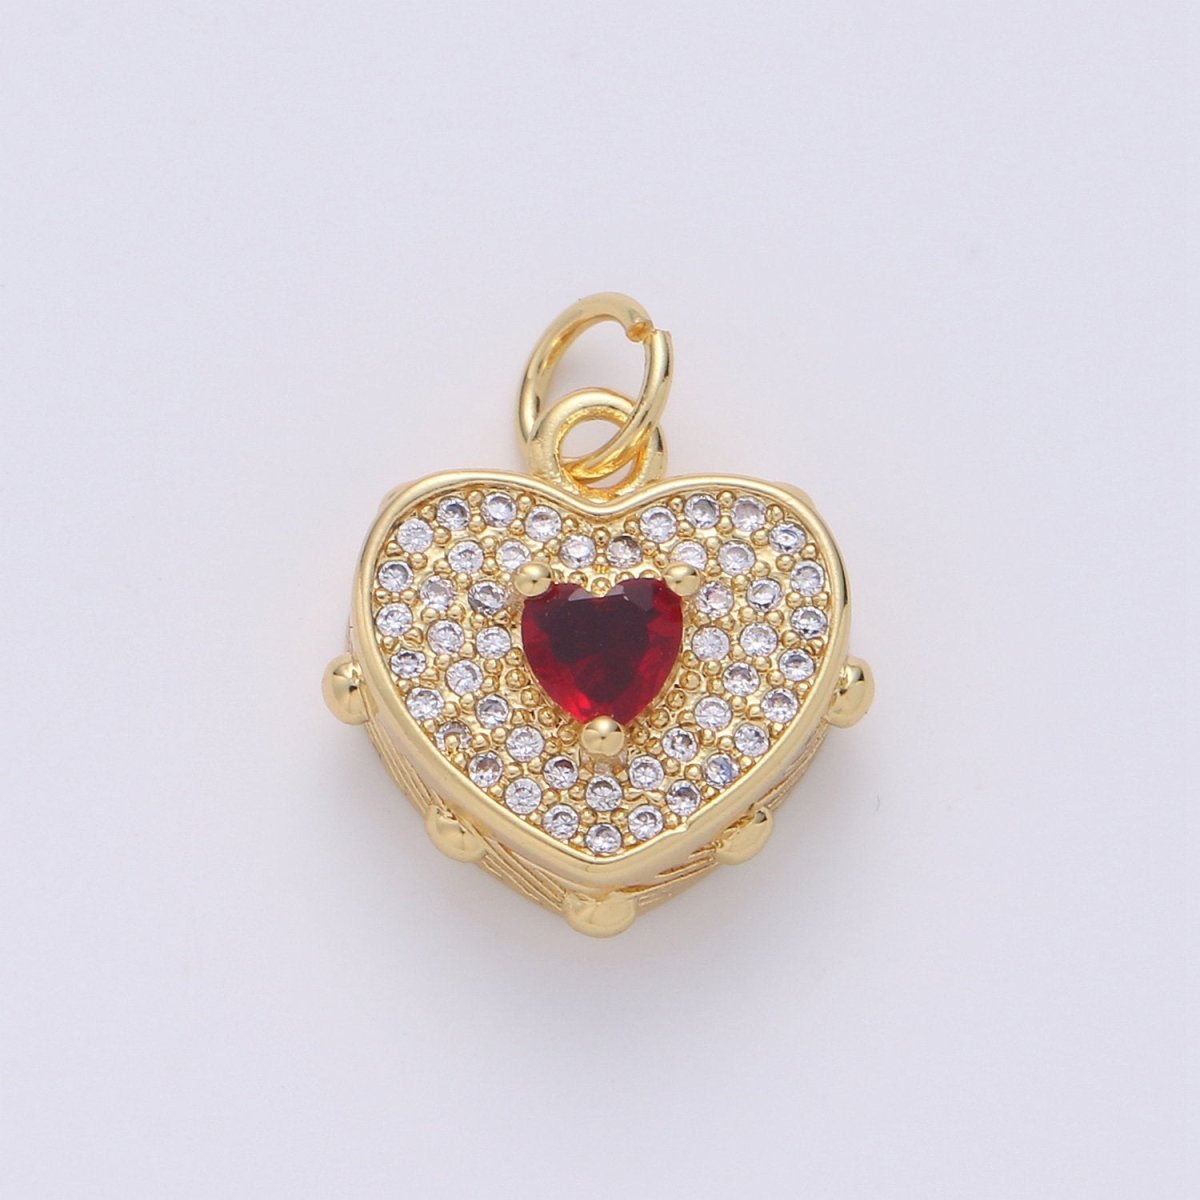 Dainty Gold Heart Pendant Necklace 24k Gold Filled Heart Charm Necklace Micro Pave Love, Heart Charm for Necklace Bracelet Earring Supply D-518 - DLUXCA